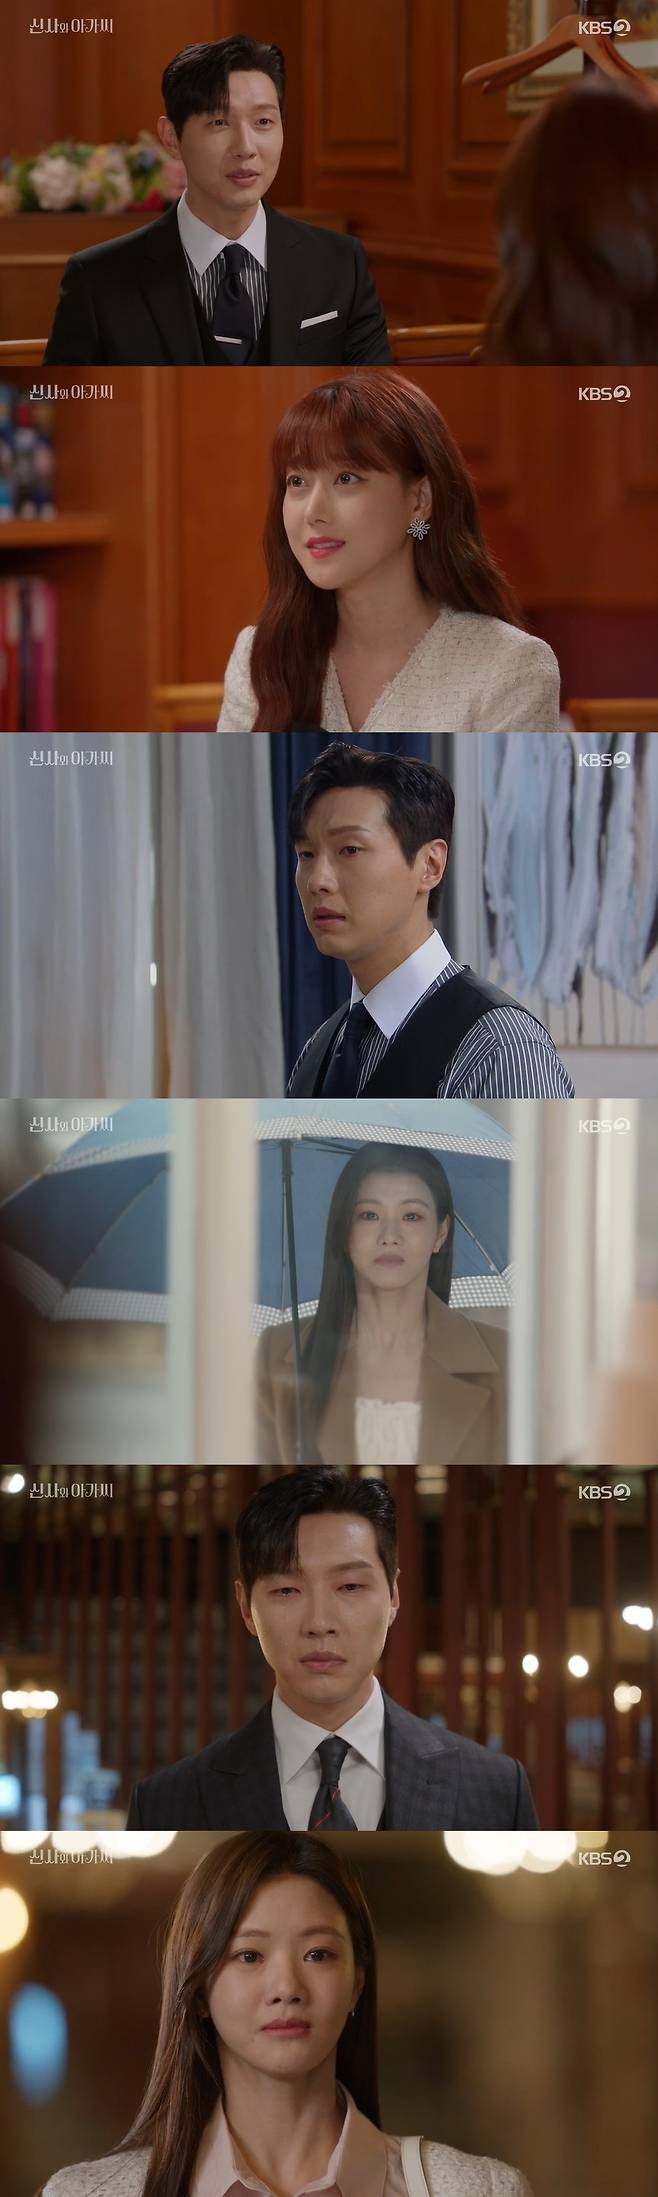 Seoul =) = Gentleman and young lady Lee Se-hee told Ji Hyun Woo, who tried to meet another woman, that he had sorted out his feelings.In the 49th KBS 2TV weekend drama Gentleman and Young Lady (played by Kim Sa-kyung/directed by Shin Chang-seok) broadcast on the 19th, I have been looking at the recruitment announcement of the resident tutor, and the figure of Lee Se-hee, who came to Lee Young-guk (Ji Hyun Woo).Park Dan-dan said she wants to work at Lee Yeong-guks house again, asking only children to think about it.However, Lee Jae-ni (Choi Myung-bin) blocked Park Dan-dan, and he asked, Did you try to come back to my house because you wanted to meet our Father again?Park said, I want to be next to you, but Lee Jae-ni said, It is always welcome to come to the teacher, but our father GFriend is against the teacher.Lee Jae-ni also said, I do not want my teacher to be our Father girlfriend. We have to meet someone who will be our mother, but the teacher becomes my mother?Is the picture drawn, it is hard to imagine, he said.Park said, I could not even imagine it from the beginning. But now I am confident, so I am not afraid to meet the president. But Lee Jae-ni said, Youre really confident that youre going to be my mother?I do not think my age difference is a few years old, he said. What people would say, I will make fun of my friends.Park said, I do not want to be a mother and a daughter if I have a lot of age differences. I want to be your friend rather than my mother.We have been doing well so far, Park said. I think we will continue to do that, I have never thought about leaving you and you.Lee Jae-ni said, I feel like I have eaten pork scaffolding and feel betrayed because the teacher thought that he was doing it.Lee Young-guk made sure that he did not intend to hire Park Dan-dan, saying, We can not do it because of our greed.Later, he asked Park to meet with him and said, Do not wait for contact because there will be no job again.He said, Park did not come to my house and did something. The children were adapting to Parks vacancy, but when they stirred it, our children became difficult. Sejong was barely silent.Park said, We can meet again, but the children want me. Lee said, We have repeated the same thing dozens of times, I do not want to do it anymore. It will be repeated again, peoples prejudice, opposition to Parks father, and opposition to Janie (Choi Myung-bin) He said.Park said, I still want to be next to the president. However, Lee said, Lets not repeat mistakes like our wounds. Park said, I will be hard and sick, but I also have a hard time and I am sick. I ask you. Lee Se-ryun (Yoon Jin-i) came to Lee Young-guks office with Friend, Lee Young-guk recognized Lee Se-ryuns Friend Jimin, and Jimin was delighted when Lee Young-guk recognized him.Jimin said he was working as a curator at the art center where his mother runs after organizing the American gallery and returning home.Later at the dinner, Jimin Confessions said he had liked Lee Yeong-guk in the past.Lee said to Lee Young-guk, Jimin asked me to tell him that he wanted to make a formal relationship with his brother. I did not have a marriage with divorce, but my brother and my mind changed.Lee Young-guk surprised Lee Se-ryun by saying, Lets meet once without worrying.Jimin said he seemed to dream at a meal with Lee Young-guk, who has been in love for a long time, and suggested, Lets meet comfortably, not burden.Jimin said he knew that Lee Young-guk had three children. Lee Young-guk suggested, I can not think of our children except for our children.Park happened to be looking like Lee Yeong-guk and Jimin in Fade to Black; Lee Yeong-guk did not untie Jimins Femme aux Bras Croisés.Park Dan-dan was shocked, saying, Who the hell is that woman?After that, Park refused, saying, There is a person I like, even though Ma Hyun Bin (Itaeli) was Confessions. I went back to Lee Young-guk and asked, What are you doing with her, why do you let any woman wear Femme aux Bras Croisés? Lee said, I am not a woman but a person who decided to meet me. I am trying to meet someone who is similar in age and living in a similar environment, so I want to meet someone who is suitable for Park.Park said, I do not like it because I have a similar age and a similar environment. I liked another man, but I hated him, I still like him. I like other people and I do not like him. He said.Park said, Do you deliberately meet another woman to forget about it, it is wrong. He said, I still like it and I can not meet other women.Lee said, I do my job, but Park said, I do not want to be with her because she likes me. Lets leave it, Im right.Later, Park Dan-dan learned from Lee Se-chan (Lee Jun-seo) that Lee Young-guk had decided to introduce the new GFriend to the children, and went to the spot and watched them.Lee Yeong-guk also made a bad break to Black and eventually apologized to Jimin, saying, I actually liked someone, but I think its less organized, I do not think Im meeting you in this state, Im sorry.Jimin also said, My brother told me that, and I was embarrassed to see the children, I was in front of the children, so I was different from my thoughts, I tried to tell my brother that I was not confident.Thats how the relationship between them was arranged.I have something to say for the last time, Park said to Lee Yeong-guk.I was sorry for me, but I was wrong, he said. I was happy and not afraid that the president was next to me, even if I had any pain and hardships, so I did not think all of them were hard.But you know that, the person who hurt me the most is the president, he said. I do not like me, the chairman who does not know anything about my mind, the president who hurts my heart like a knife because of such a president, I do not like it anymore.